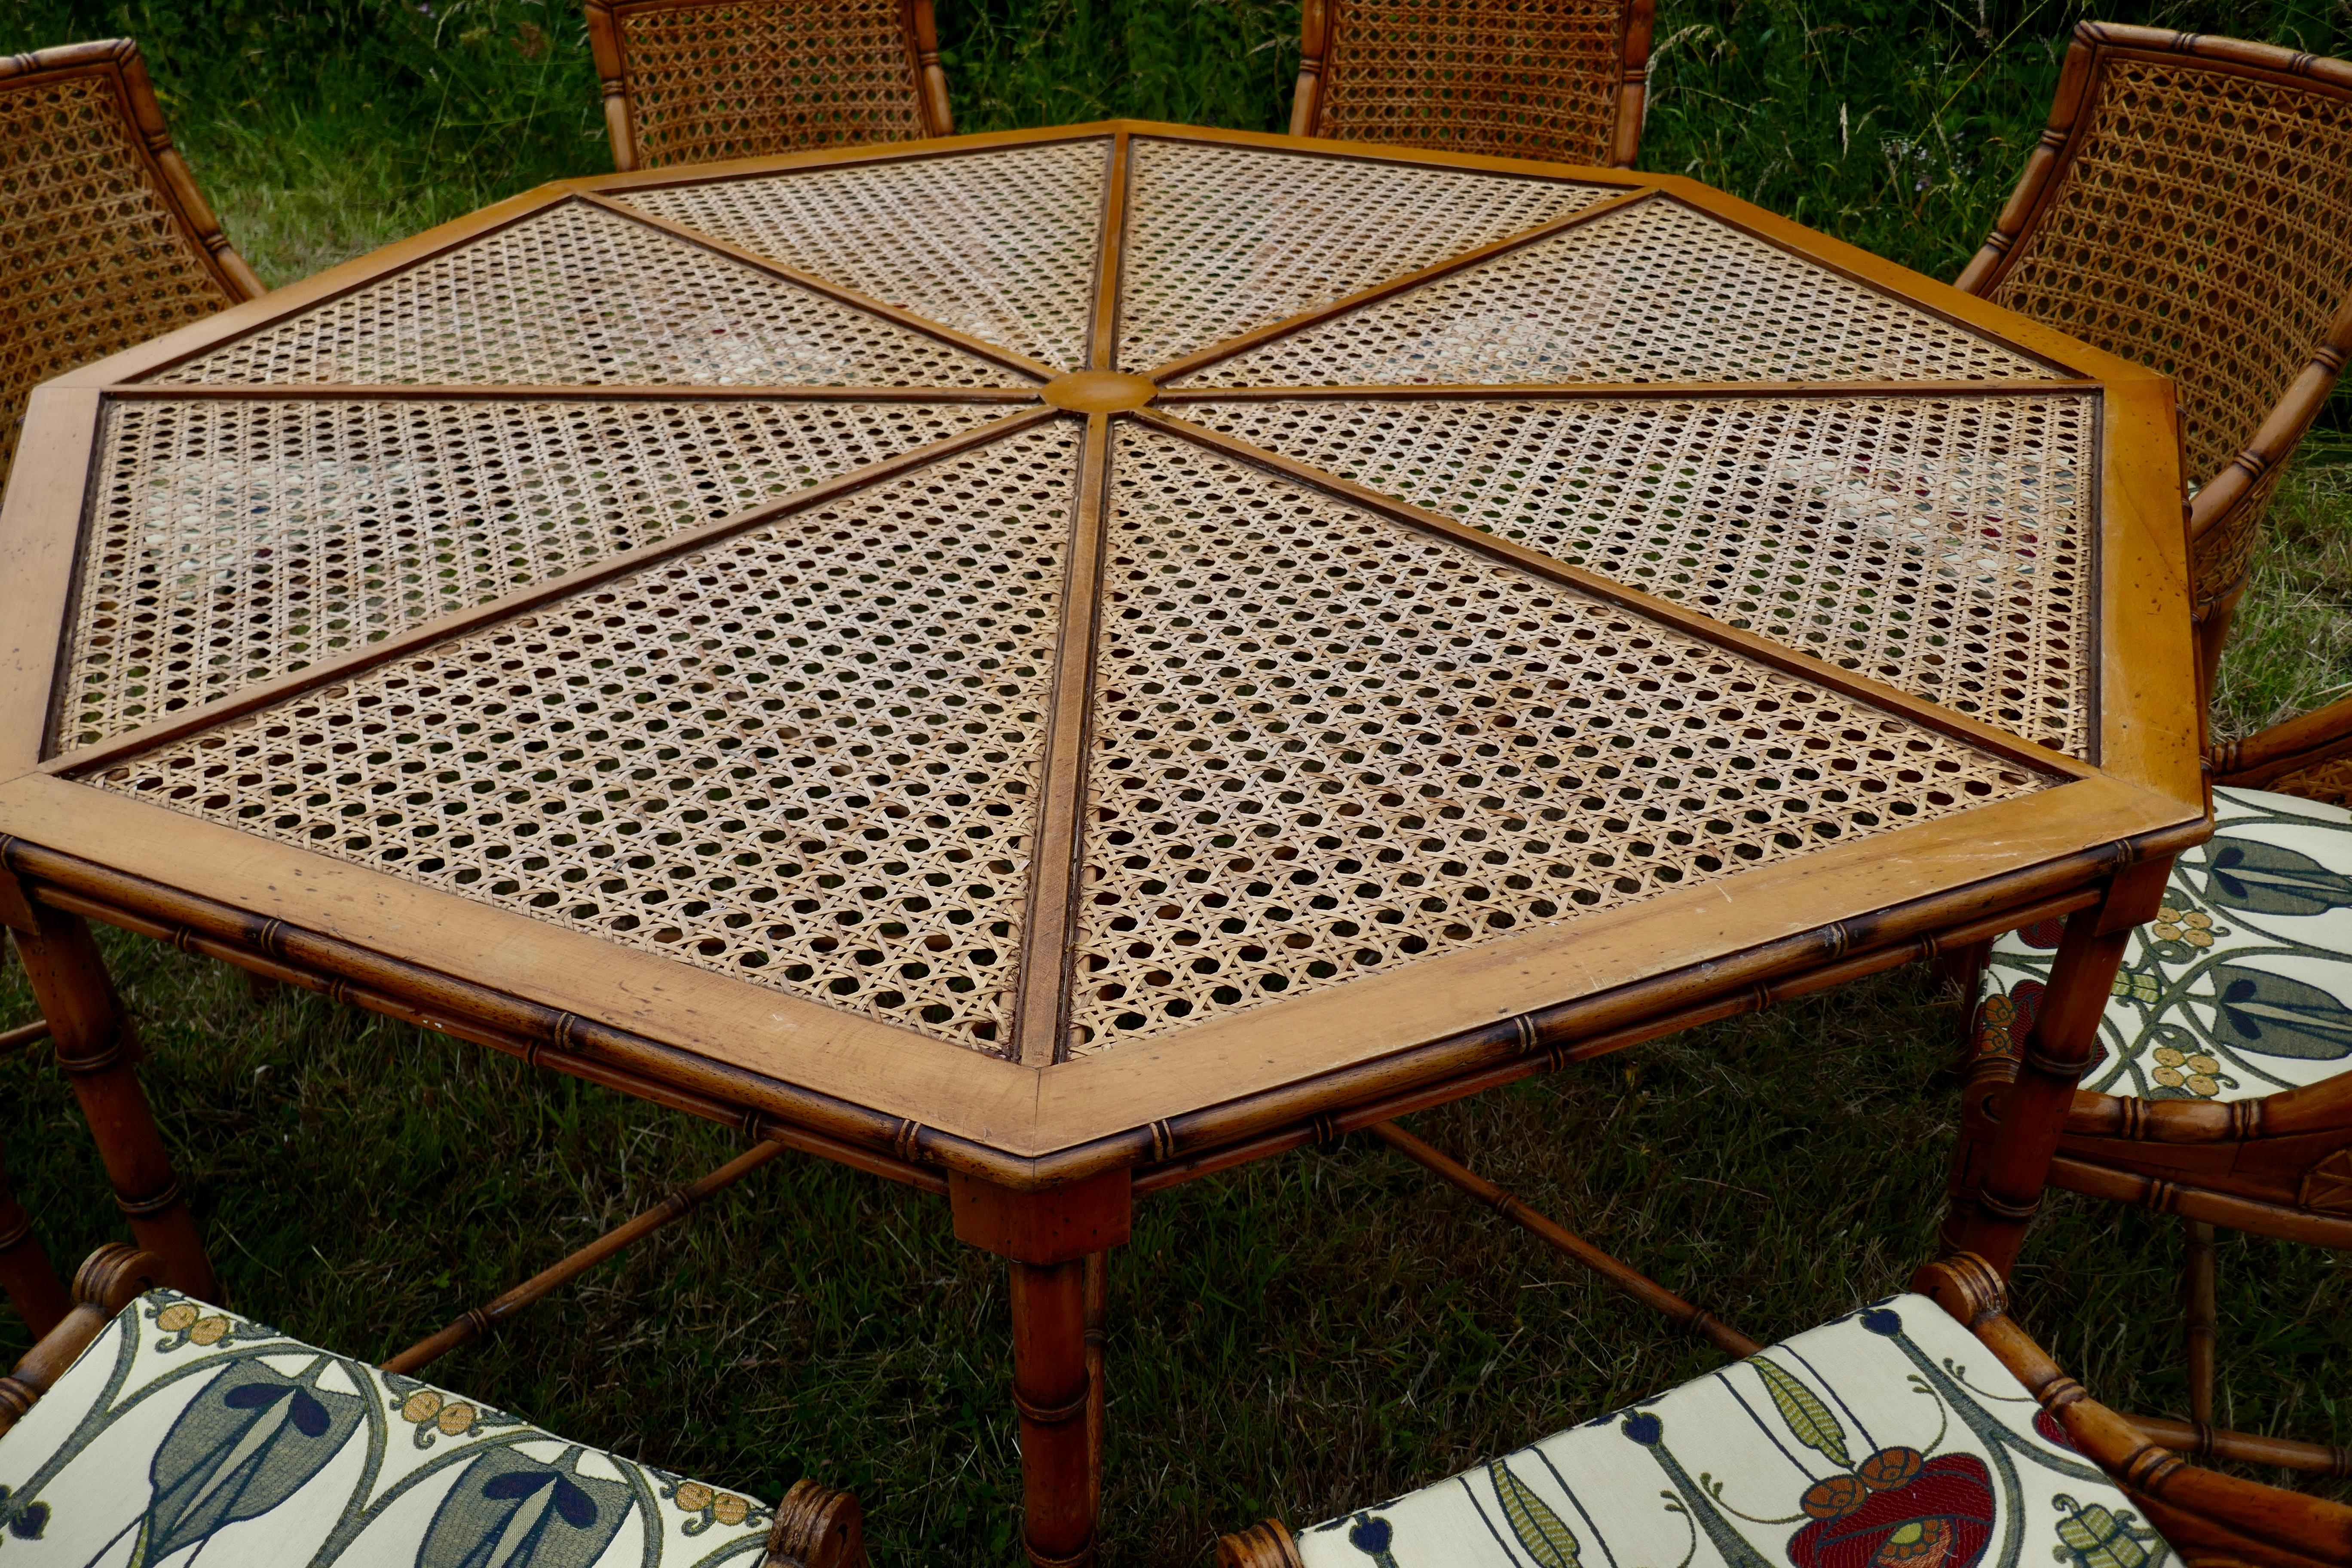 Regency style simulated bamboo and bergèr set of 8 chairs and octagonal table

This superb and very large set would be wonderful in a large Garden or modern conservatory, the table is octagonal and accommodates a diner at the end of each octagonal